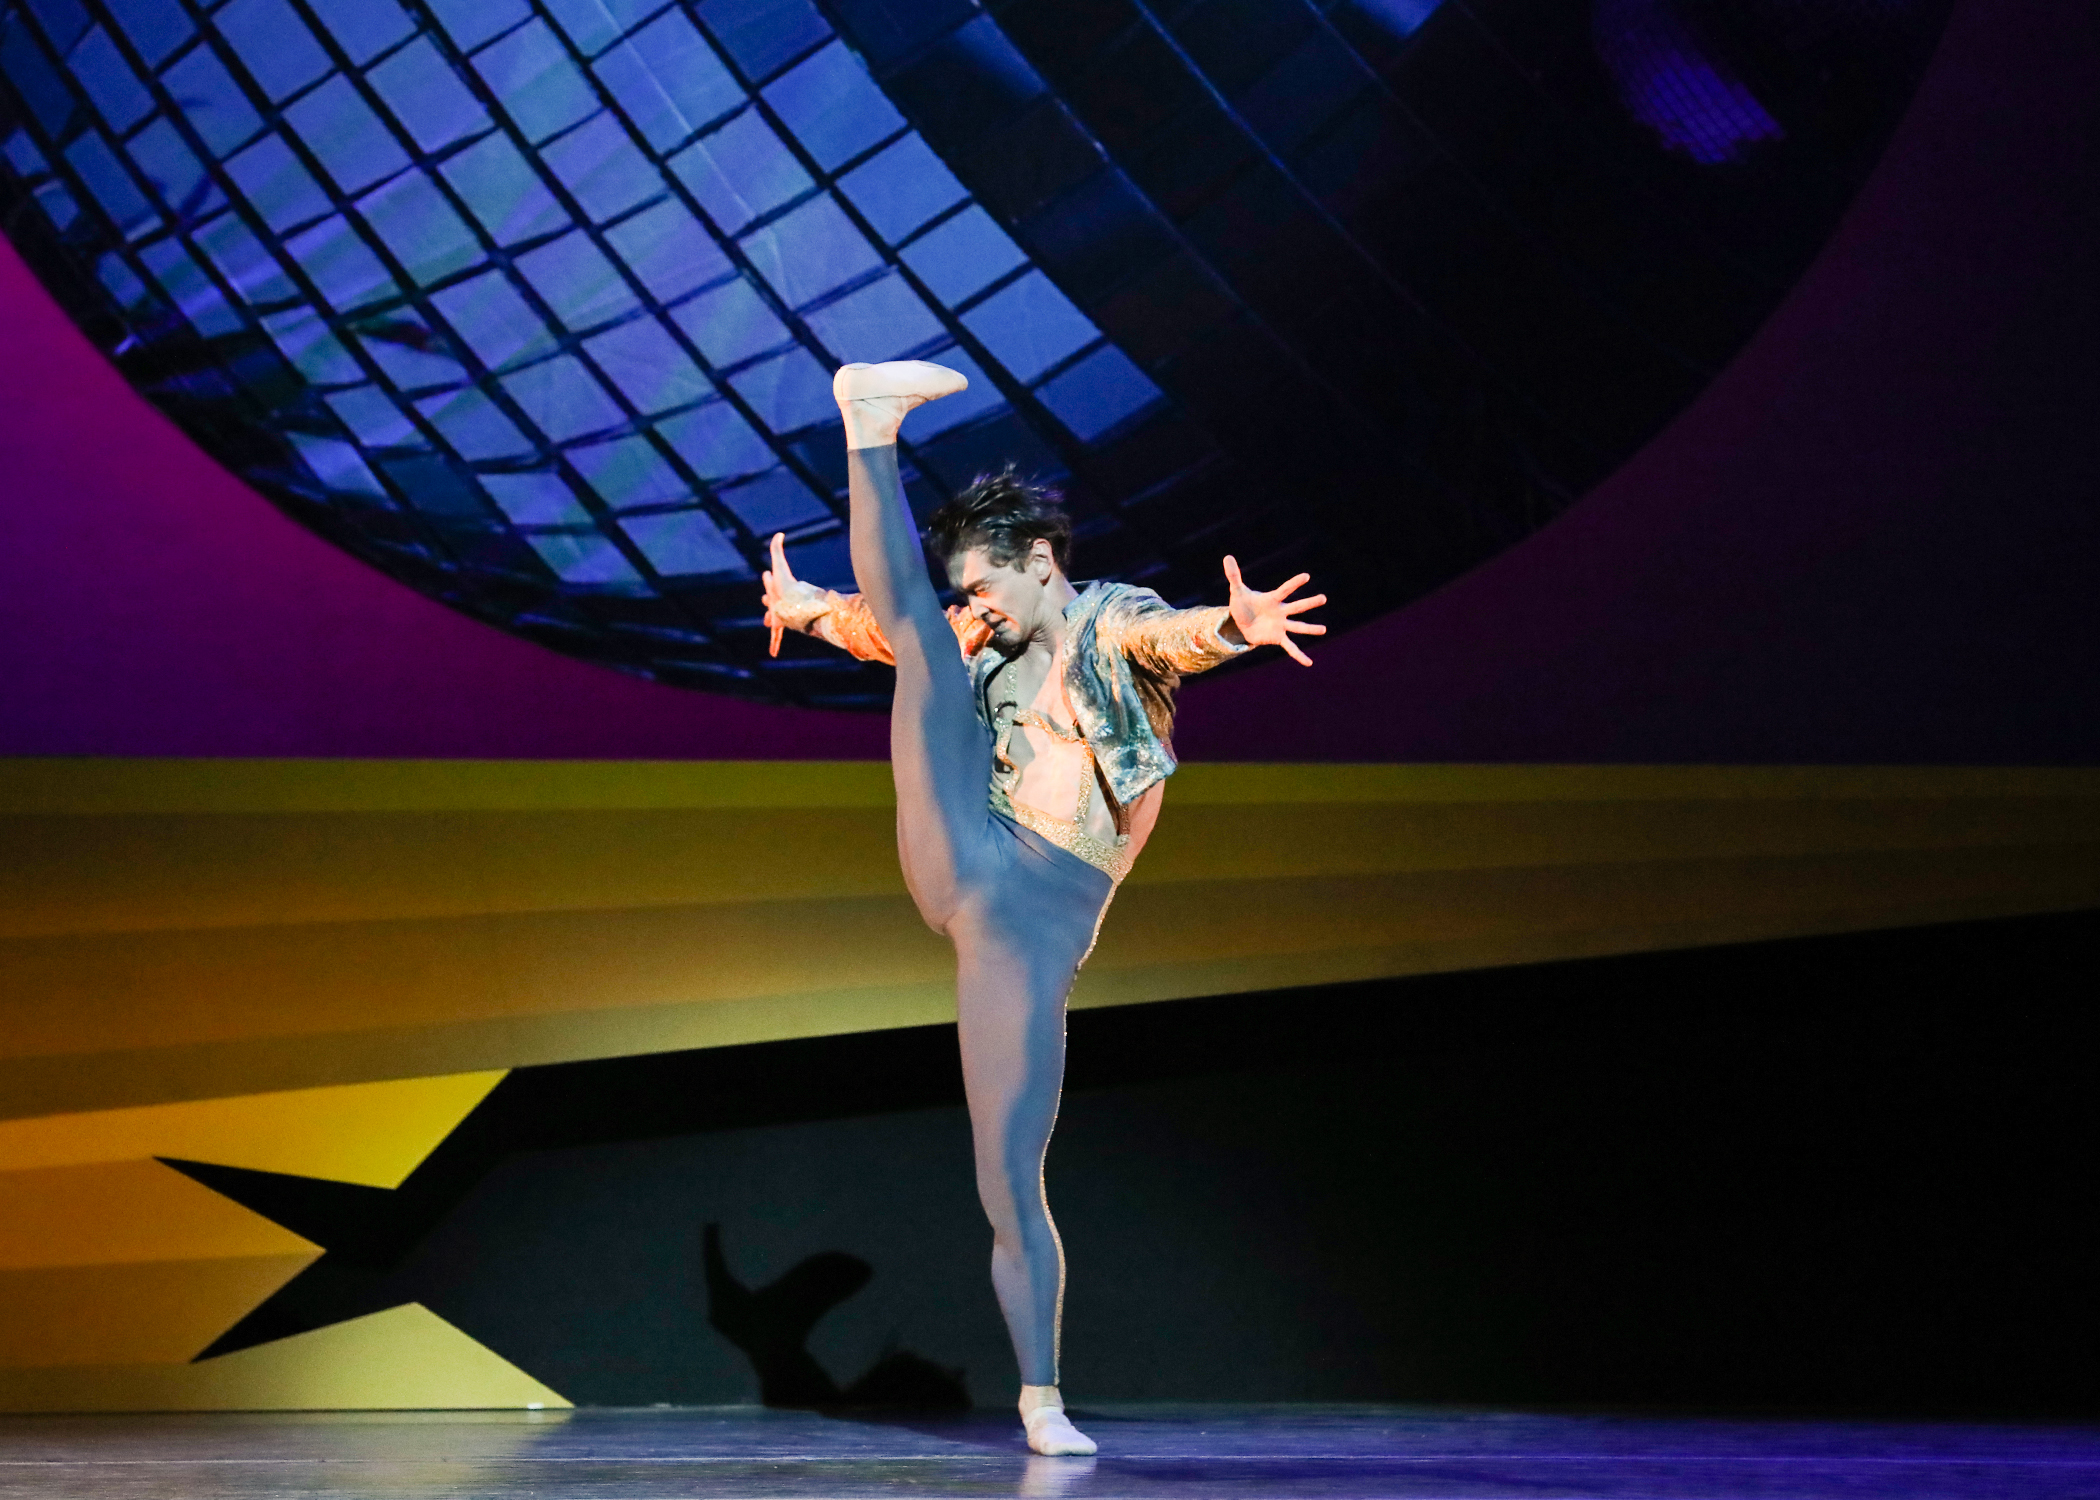 A male dancer battements his leg forward with a flexed foot, bottom leg in plié. He contracts his upper body slightly as the leg reaches 180 degrees, arms outstretched to his sides. In the background, an image of a massive blue disco ball.